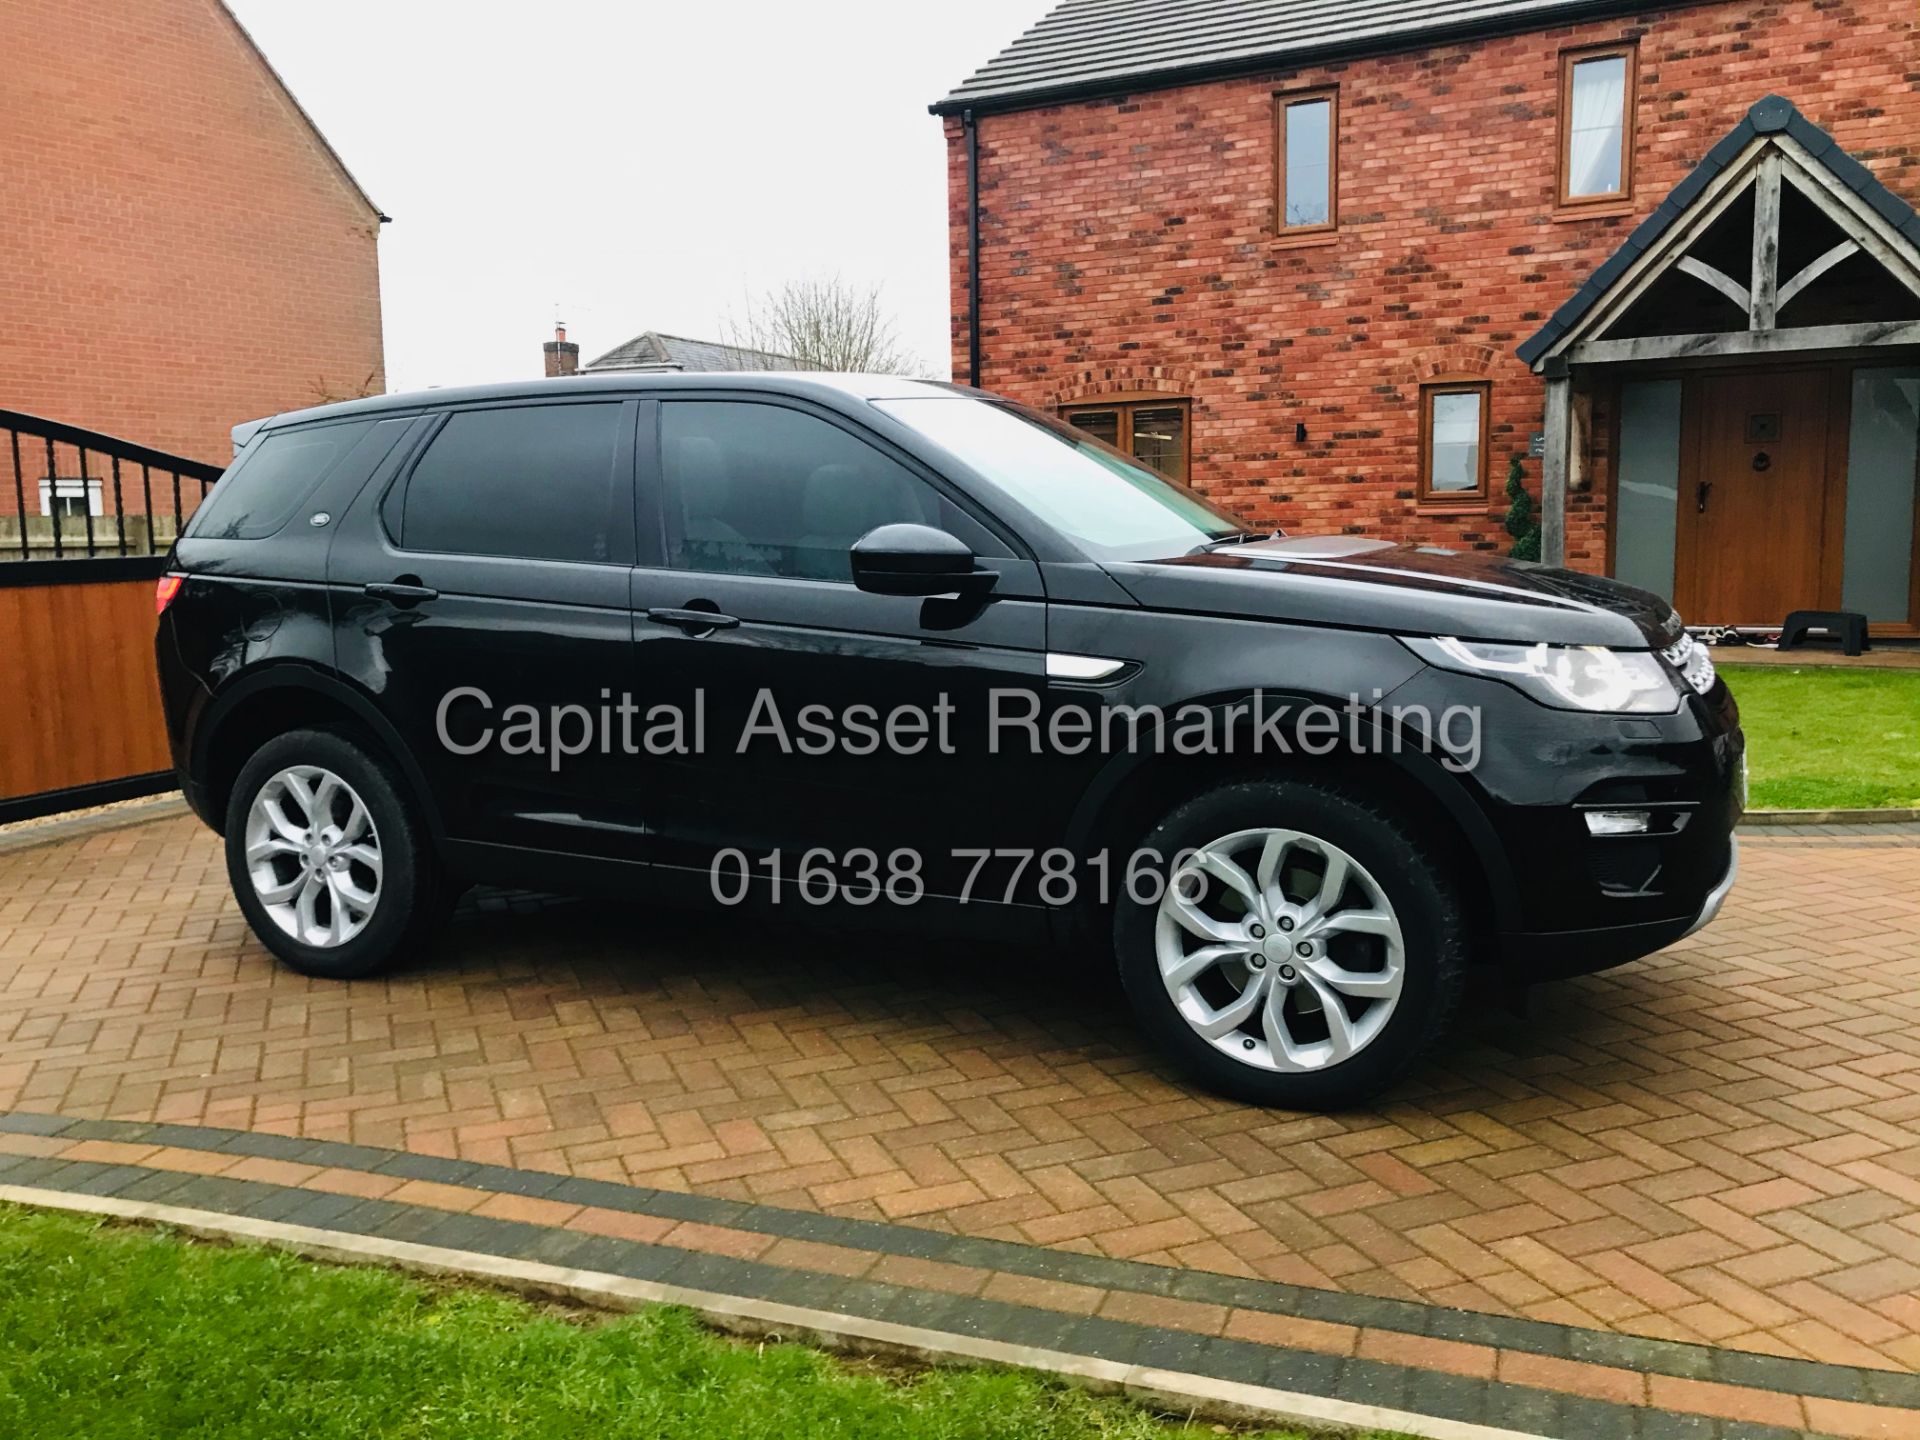 ON SALE LAND ROVER DISCOVERY SPORT "HSE" AUTO 7 SEATER (2019 MODEL) - SAT NAV -LEATHER *PAN ROOF*